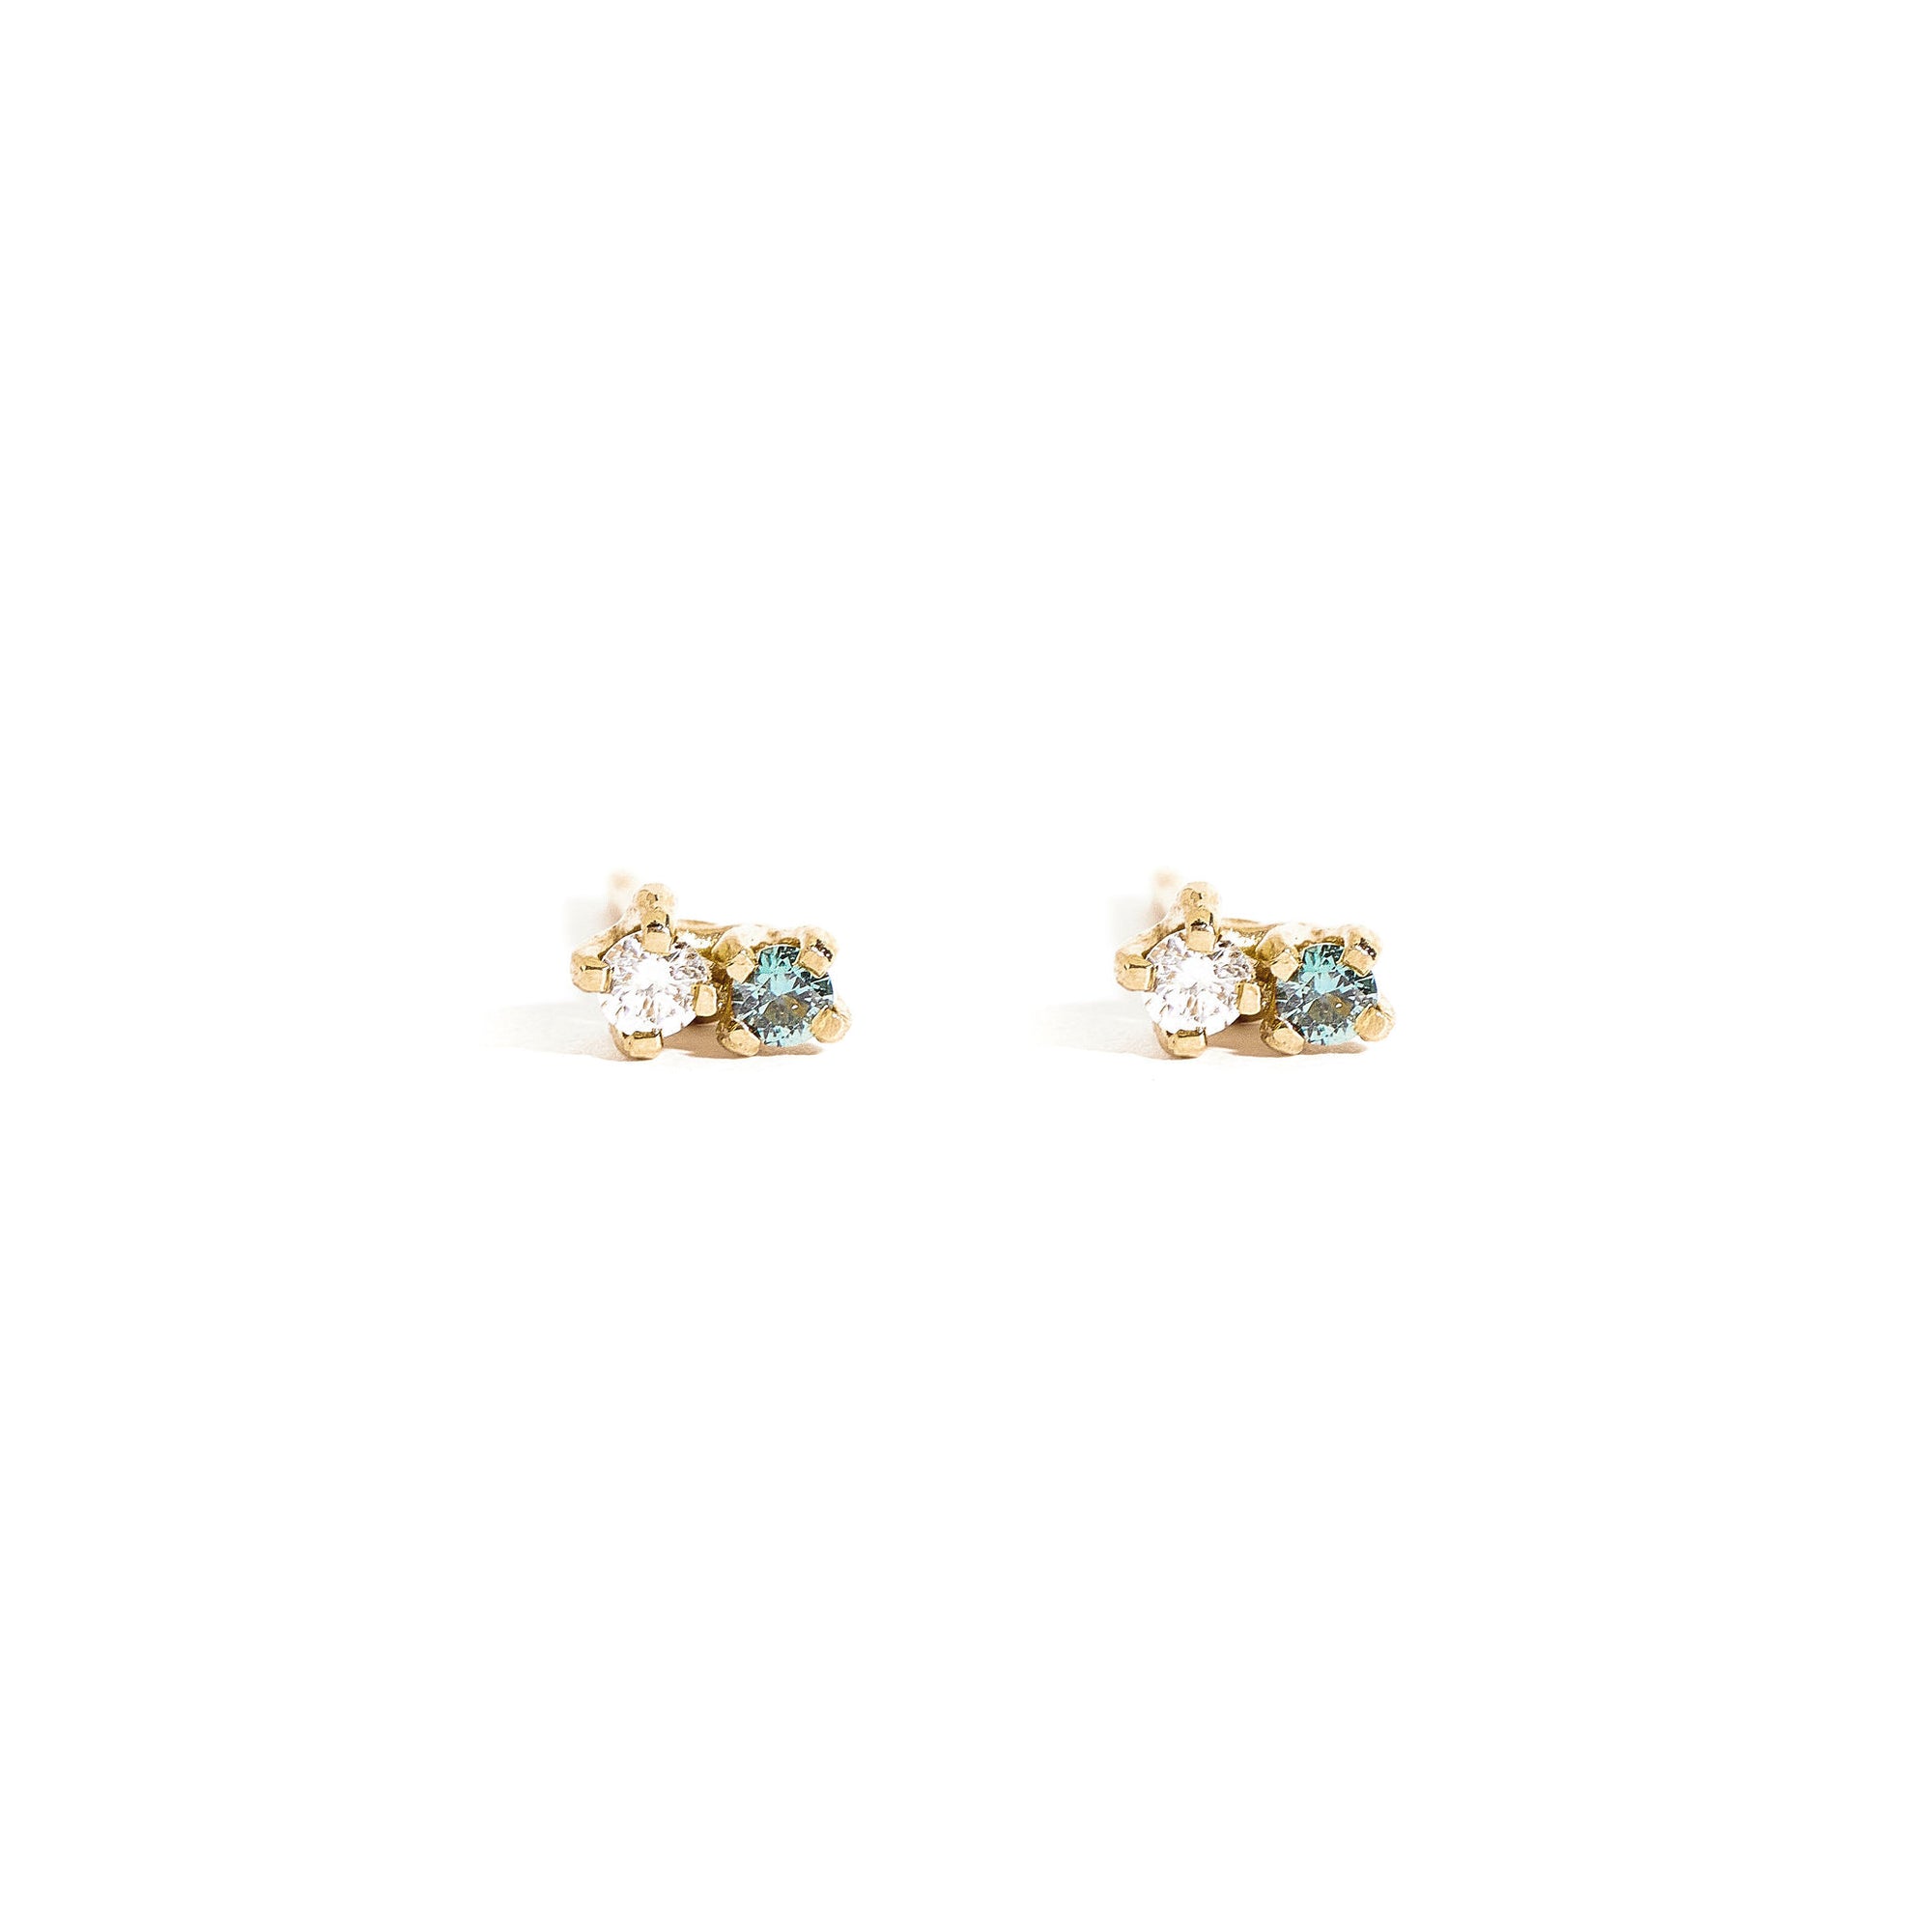 Teal Sapphire and Diamond Handmade Earrings in 9ct Gold 